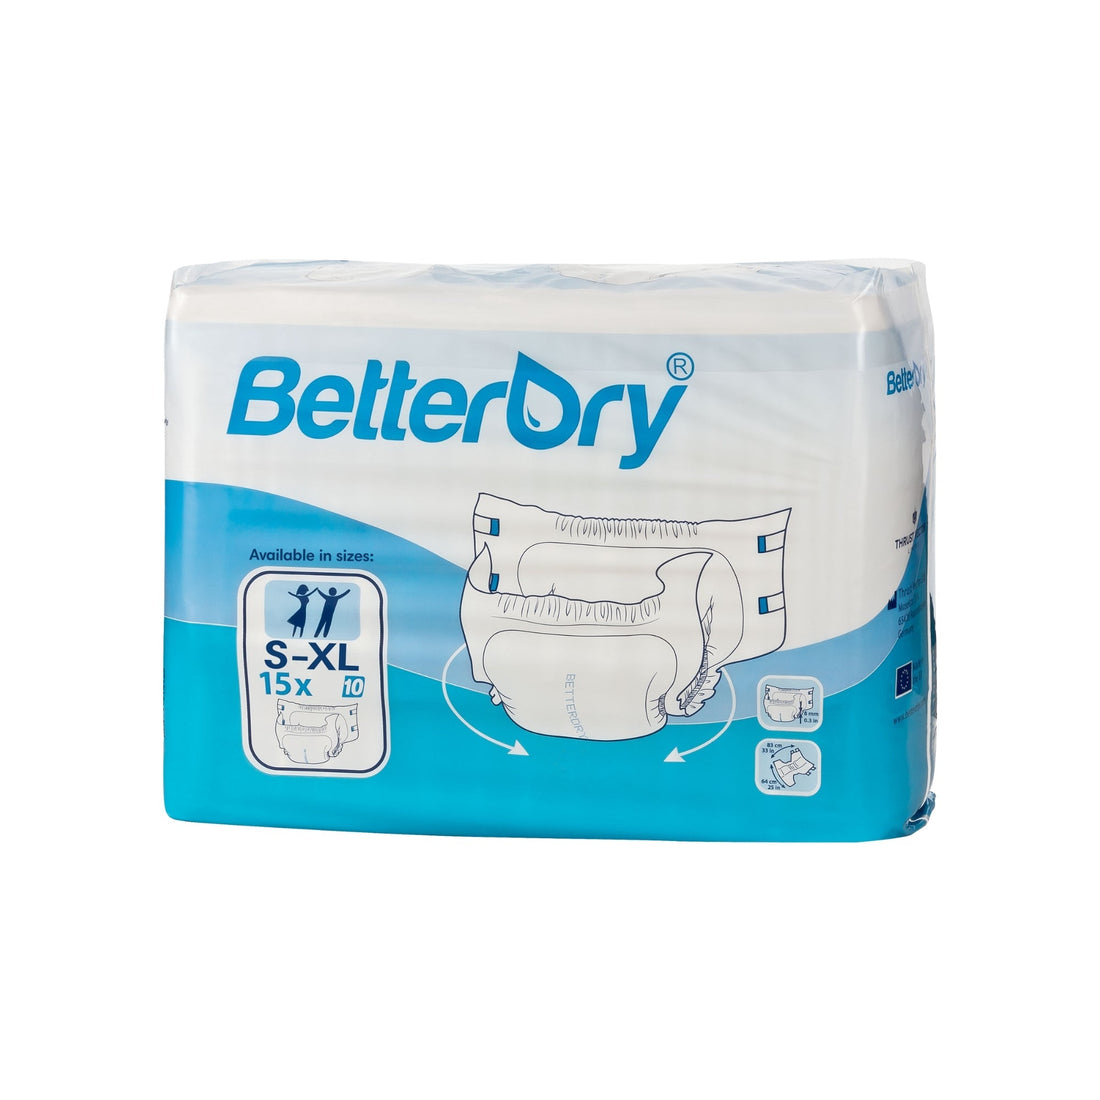 BetterDry 10 adult diaper polybag front view